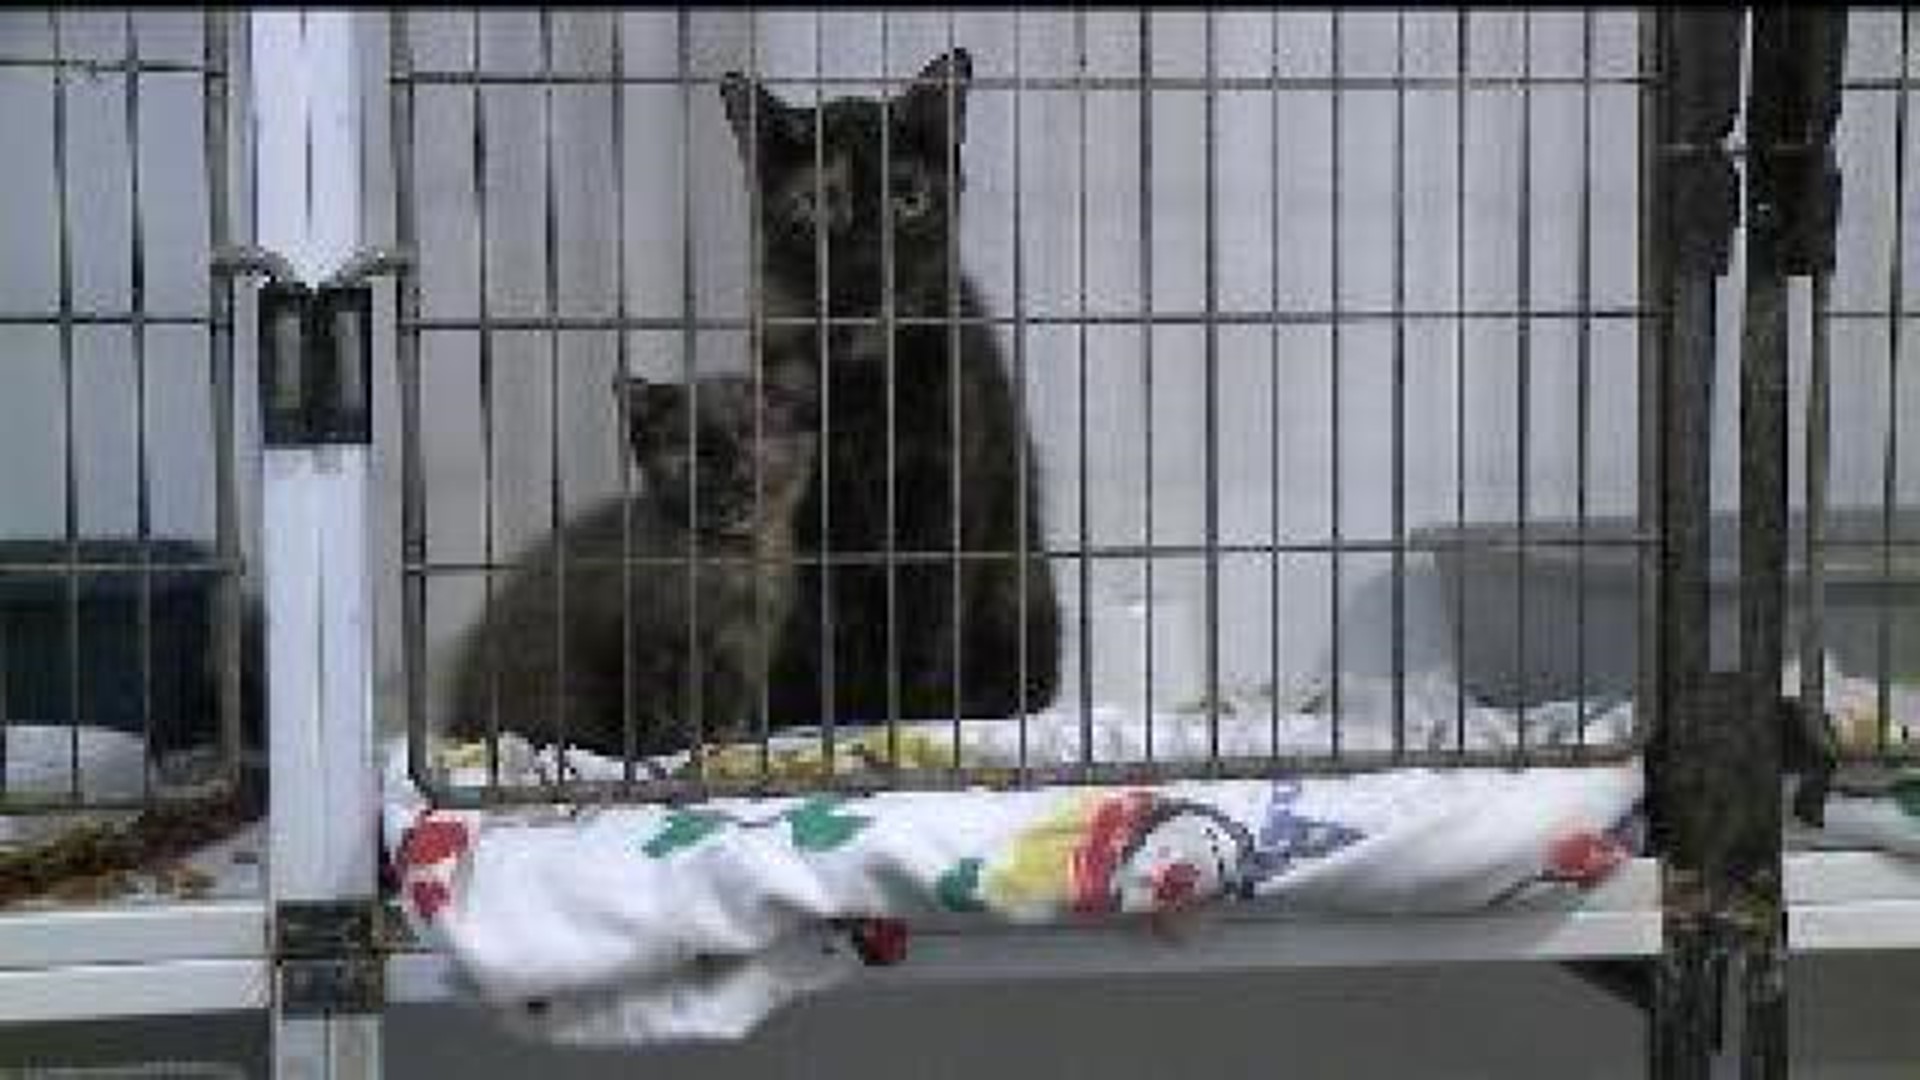 70 cats found in Monmouth residence